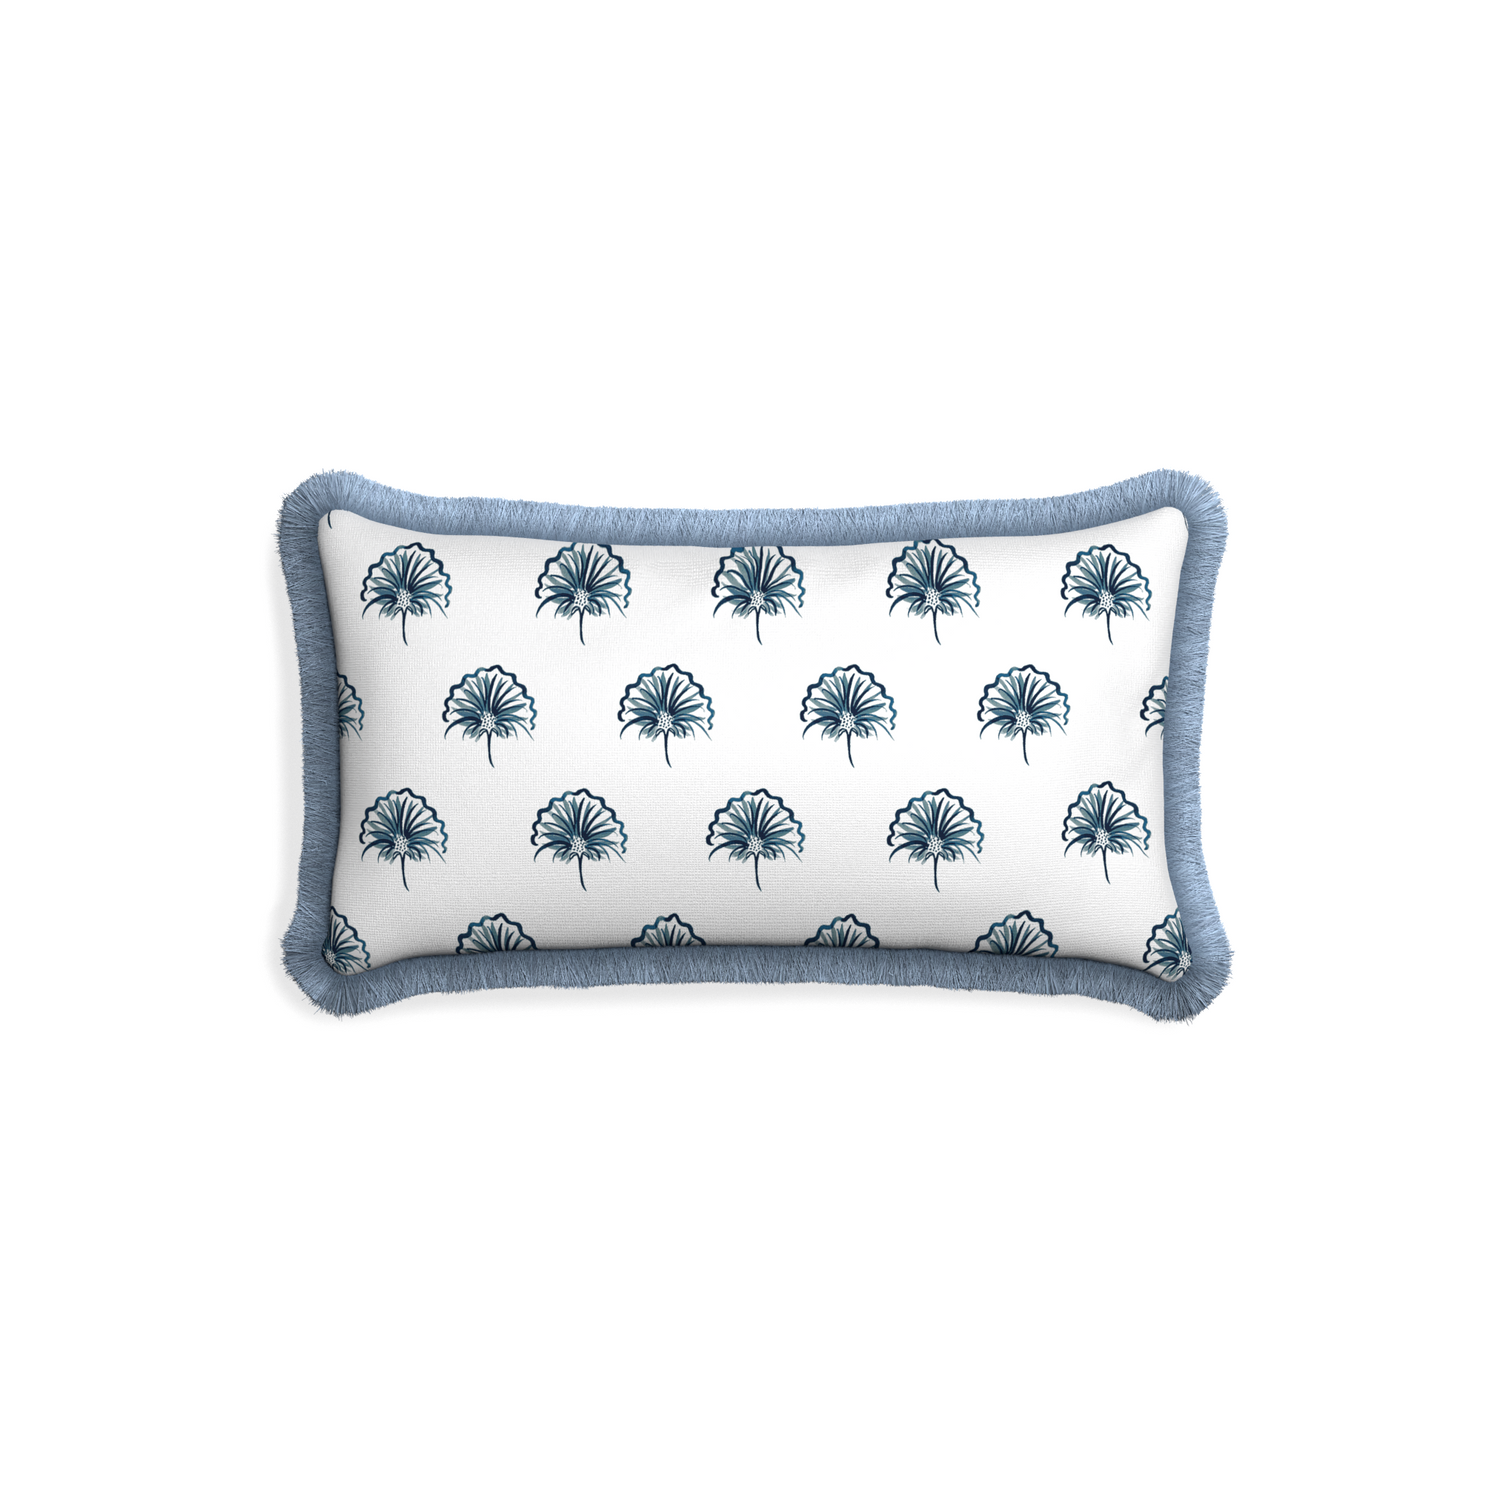 Petite-lumbar penelope midnight custom floral navypillow with sky fringe on white background